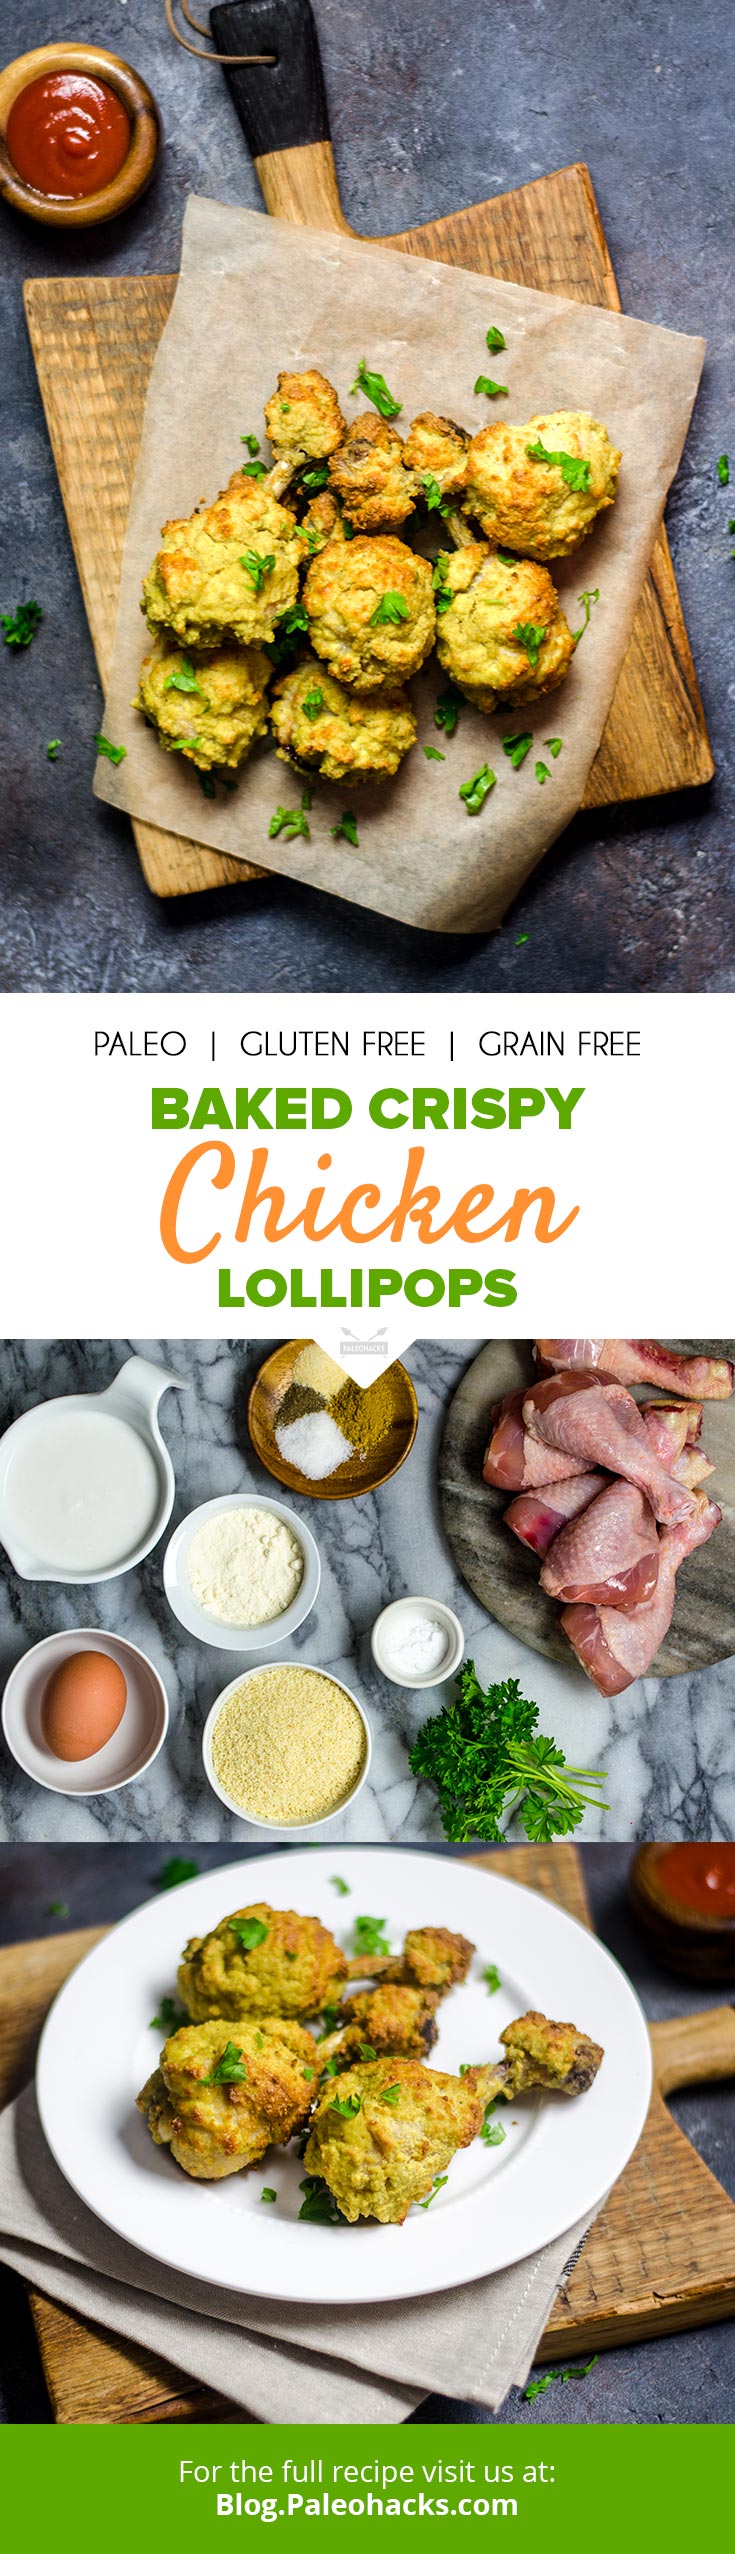 These curried chicken lollipops are baked, not fried, making for a healthier and easier version of a classic appetizer.